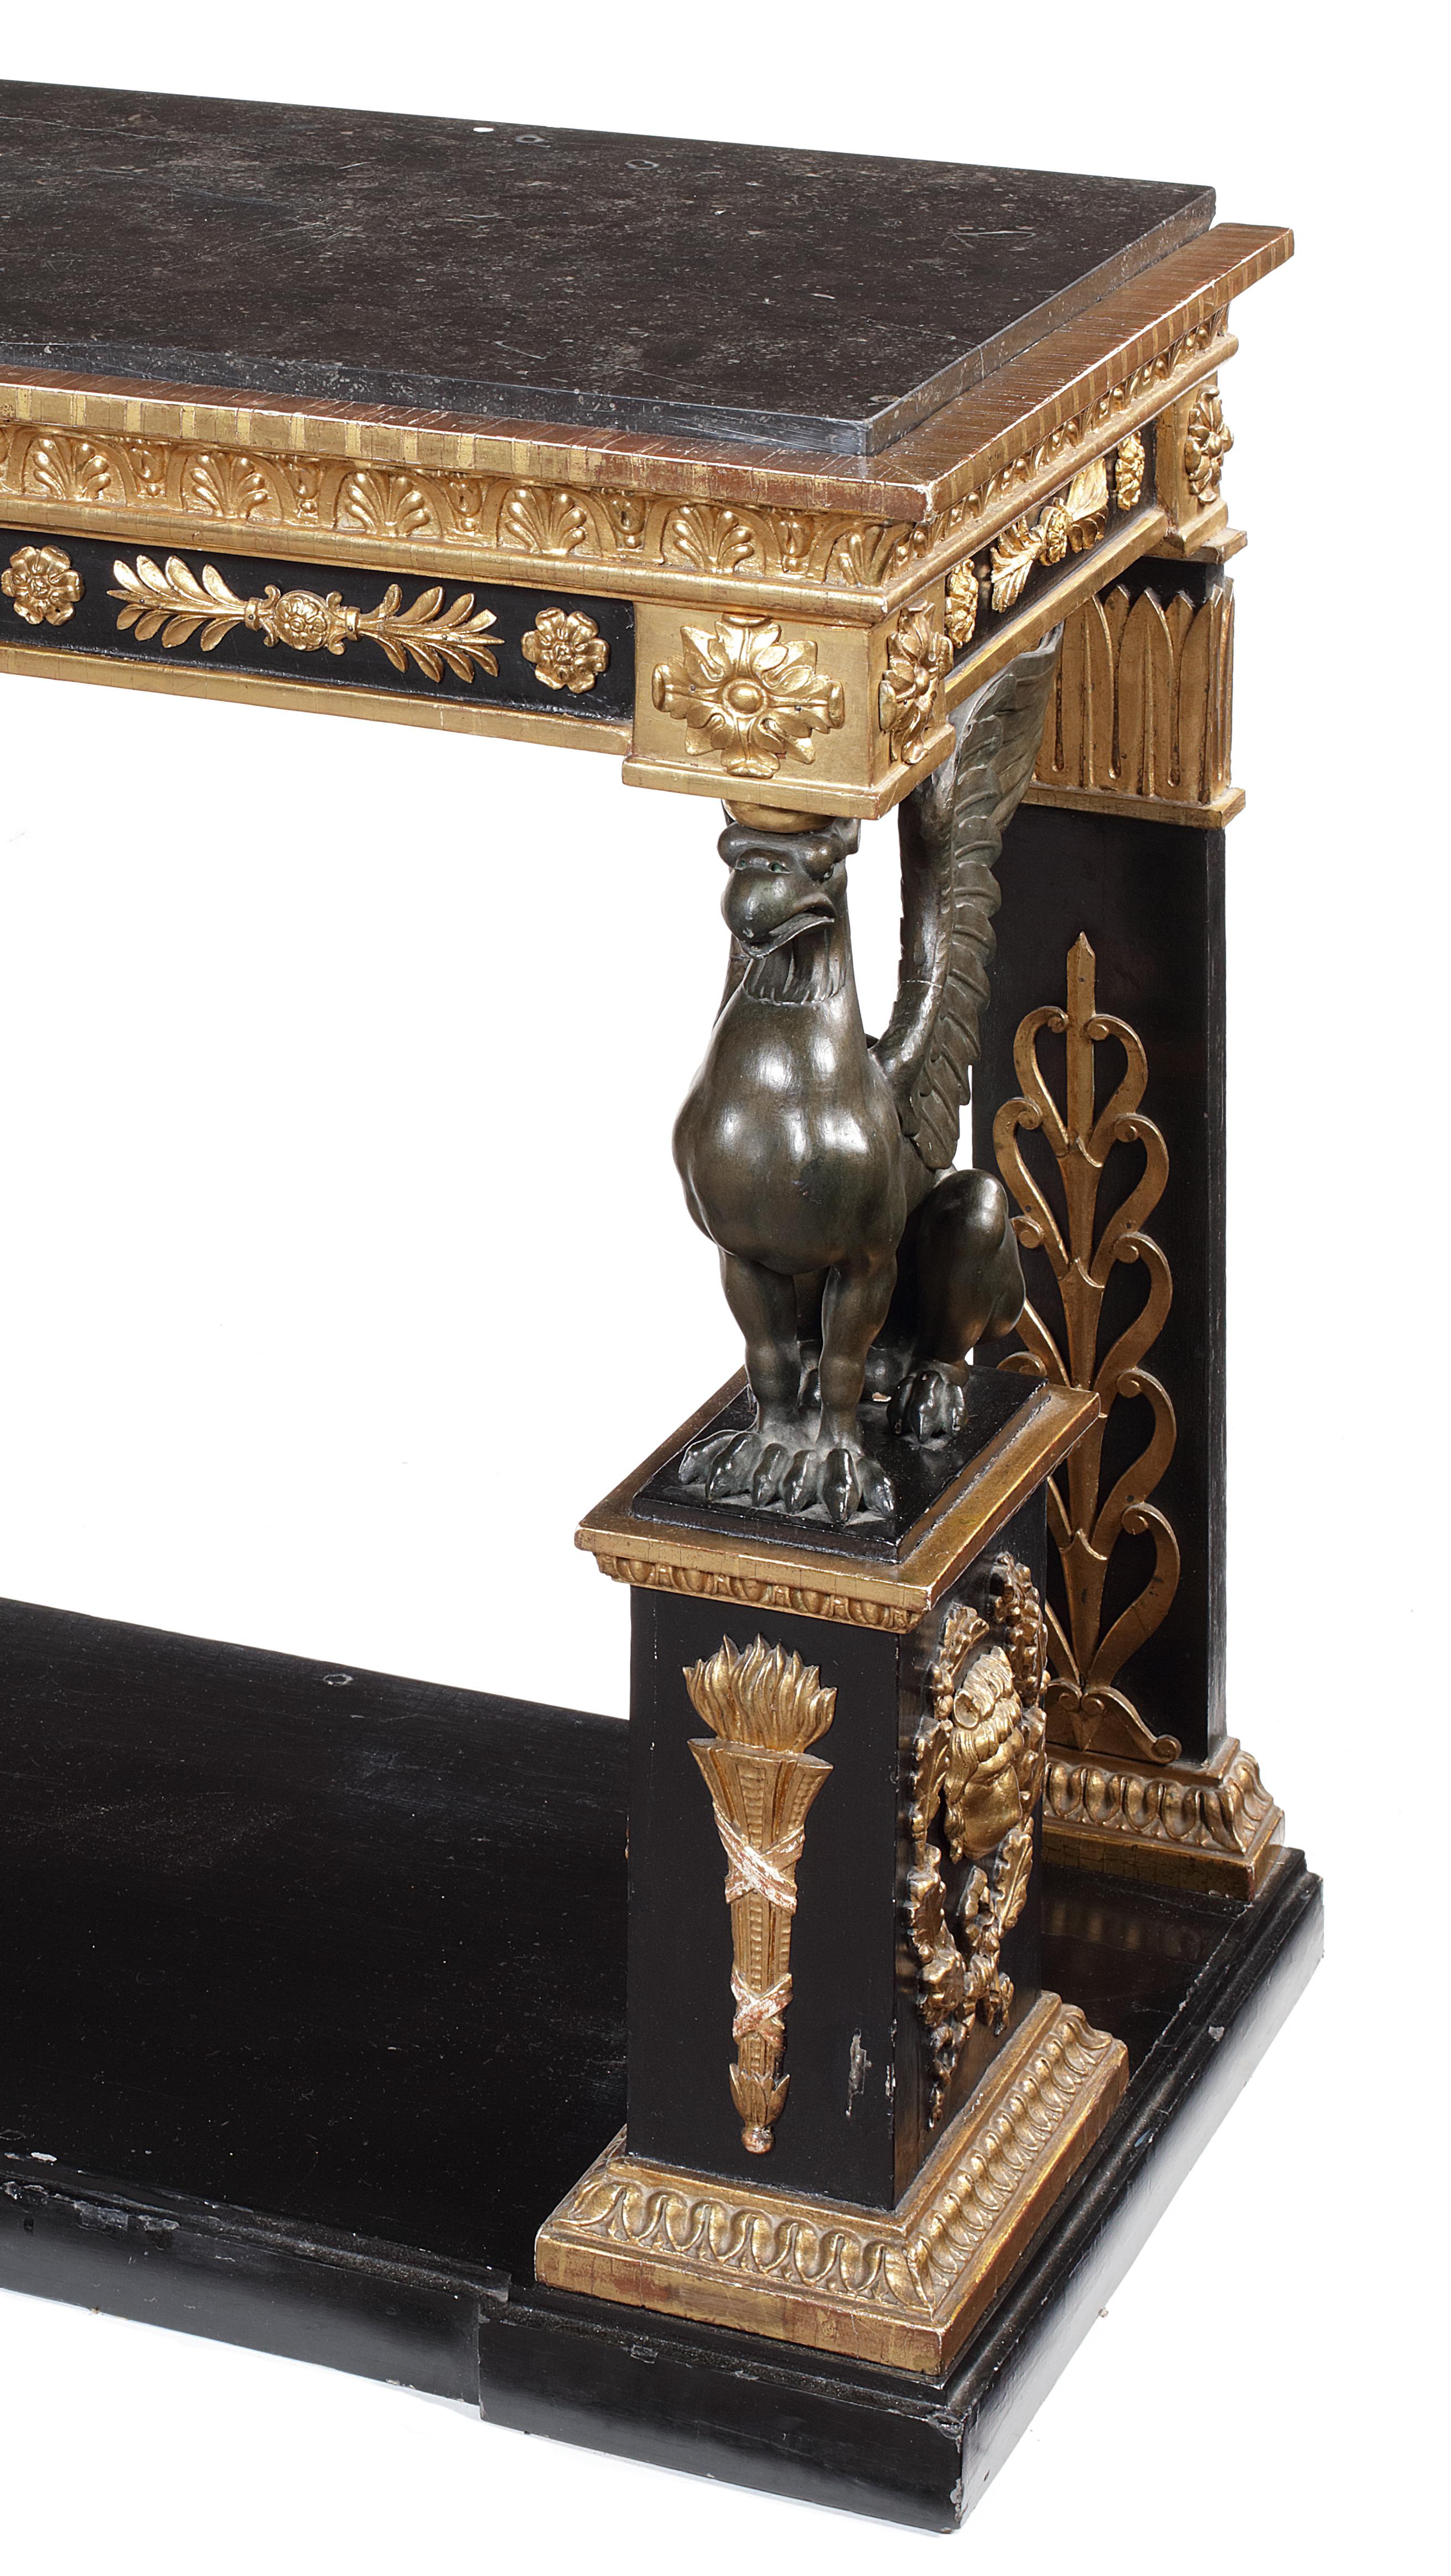 European 19th Century and Later, Ebonised, Gilt Wood and Composition Console Table